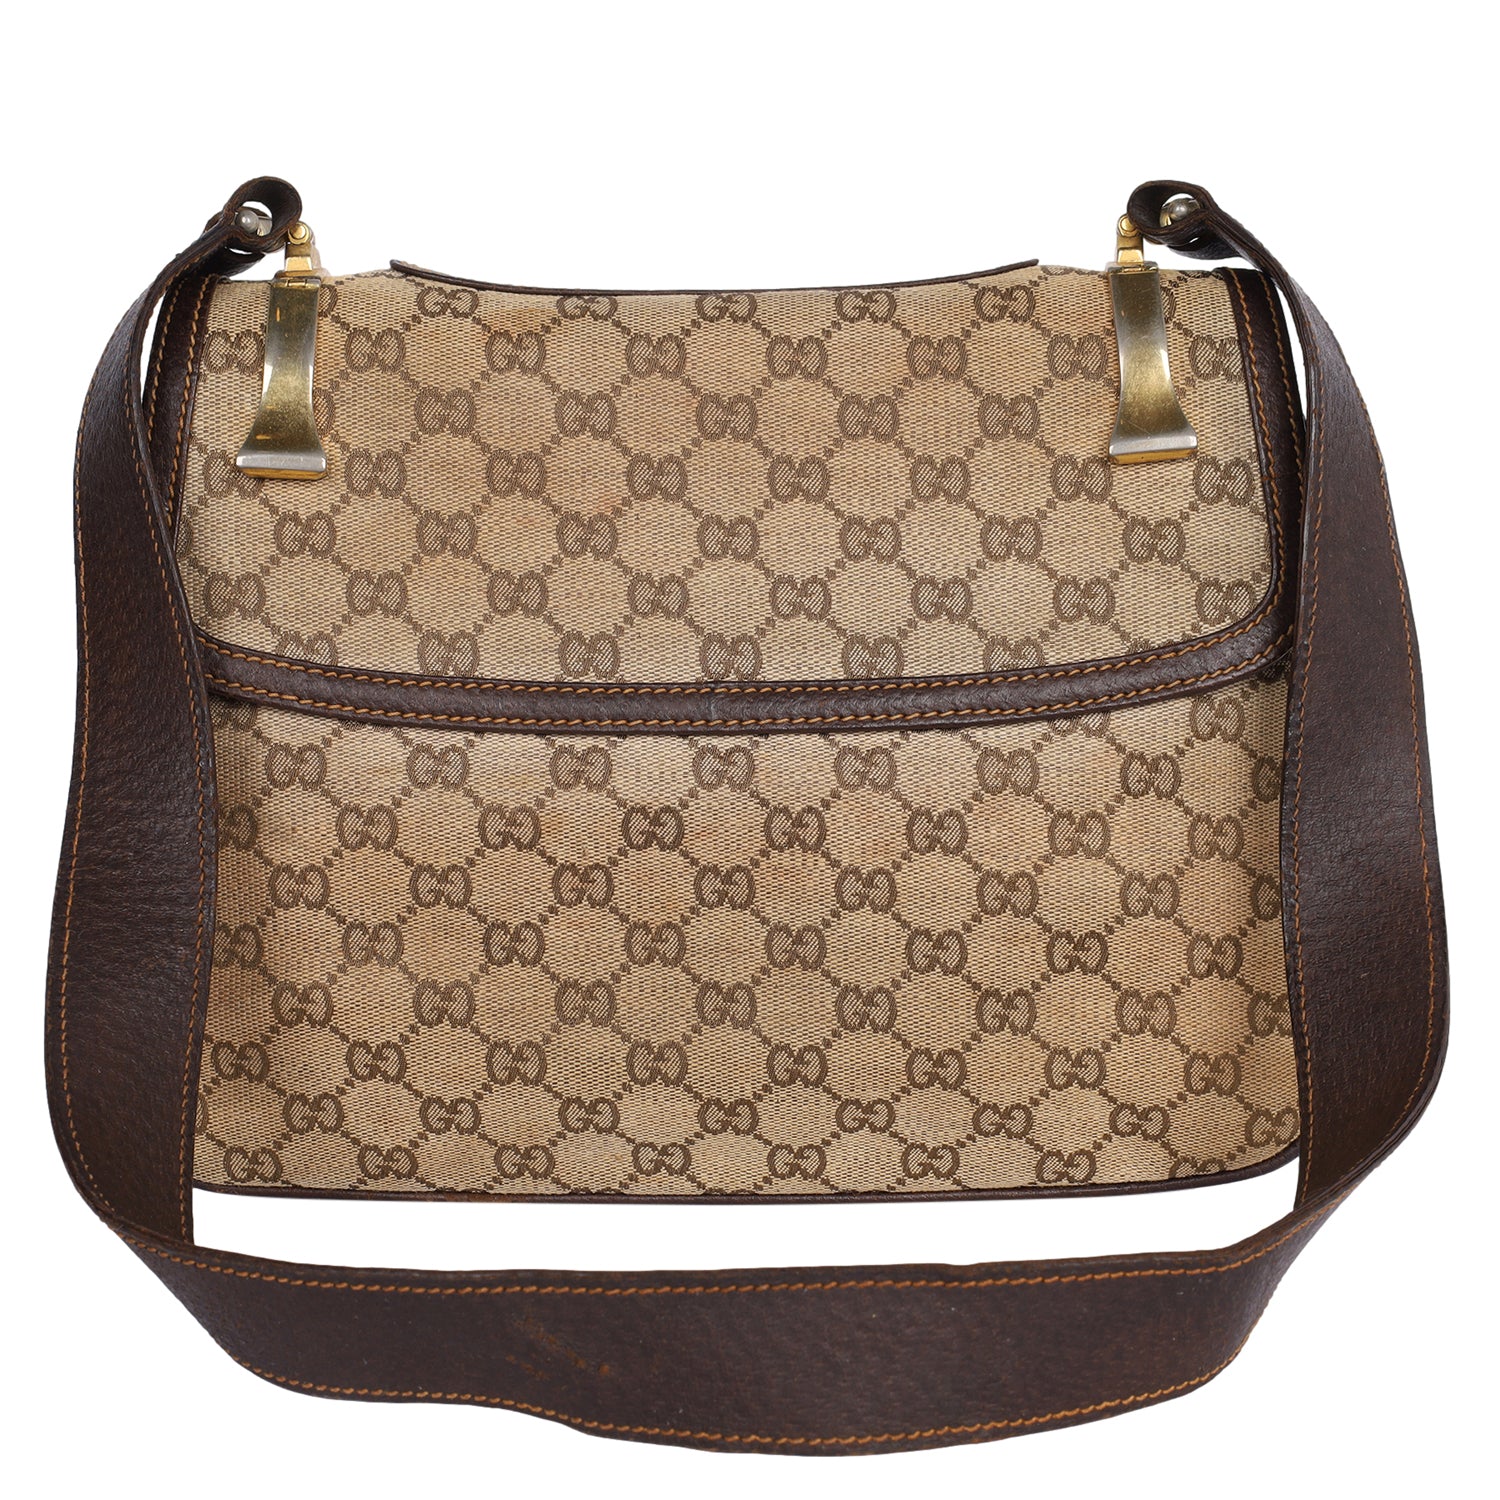 Gucci Women's Pre-Loved Belt Bag, GG Canvas, Brown, One Size